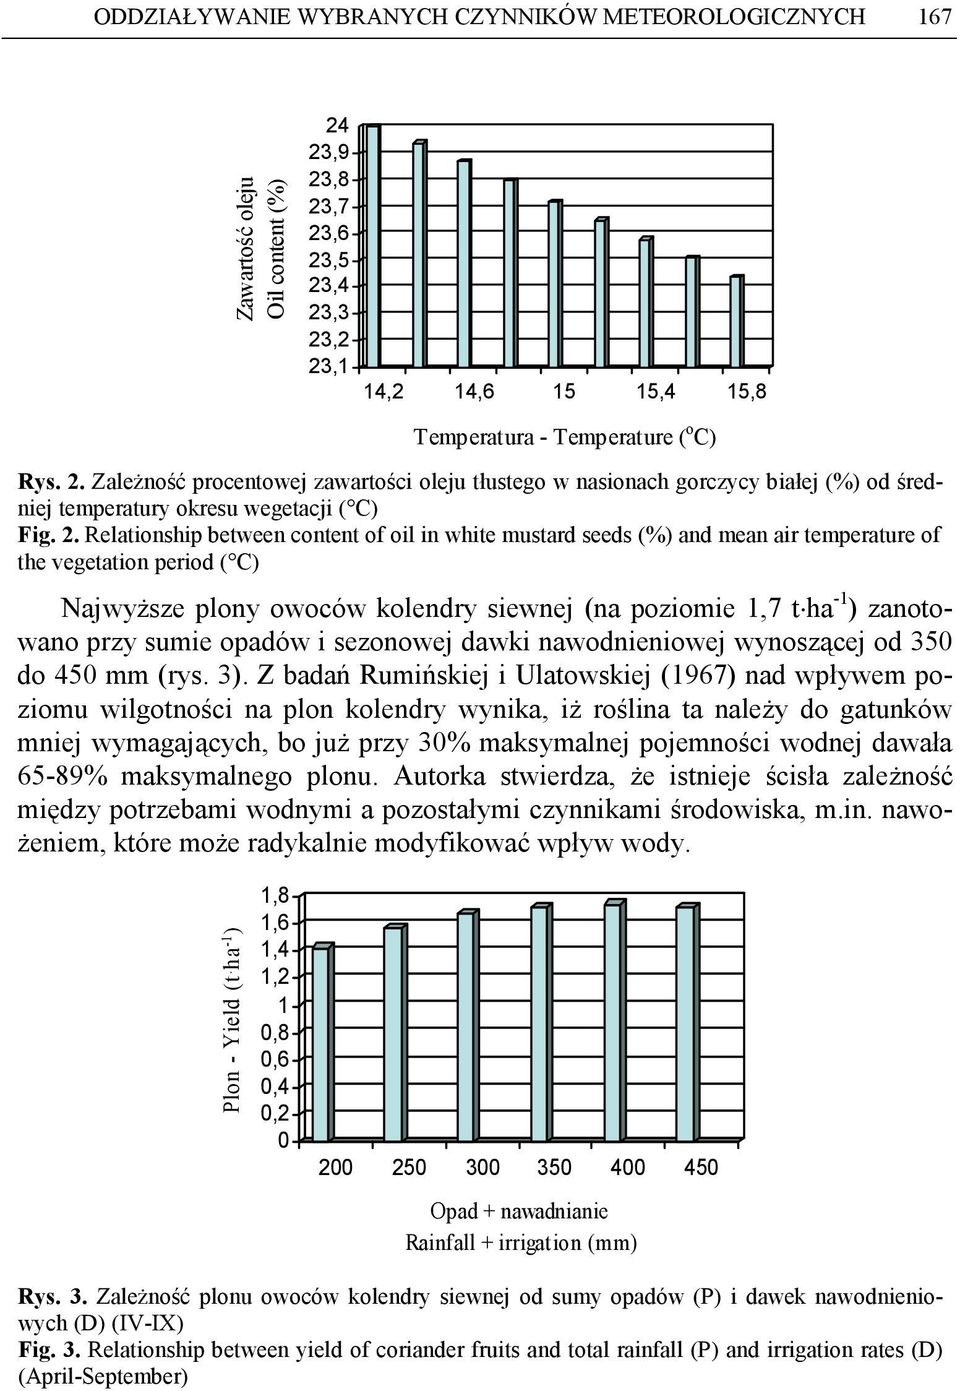 2. Relationship between content of oil in white mustard seeds (%) and mean air temperature of the vegetation period ( C) NajwyŜsze plony owoców kolendry siewnej (na poziomie 1,7 t ha -1 ) zanotowano